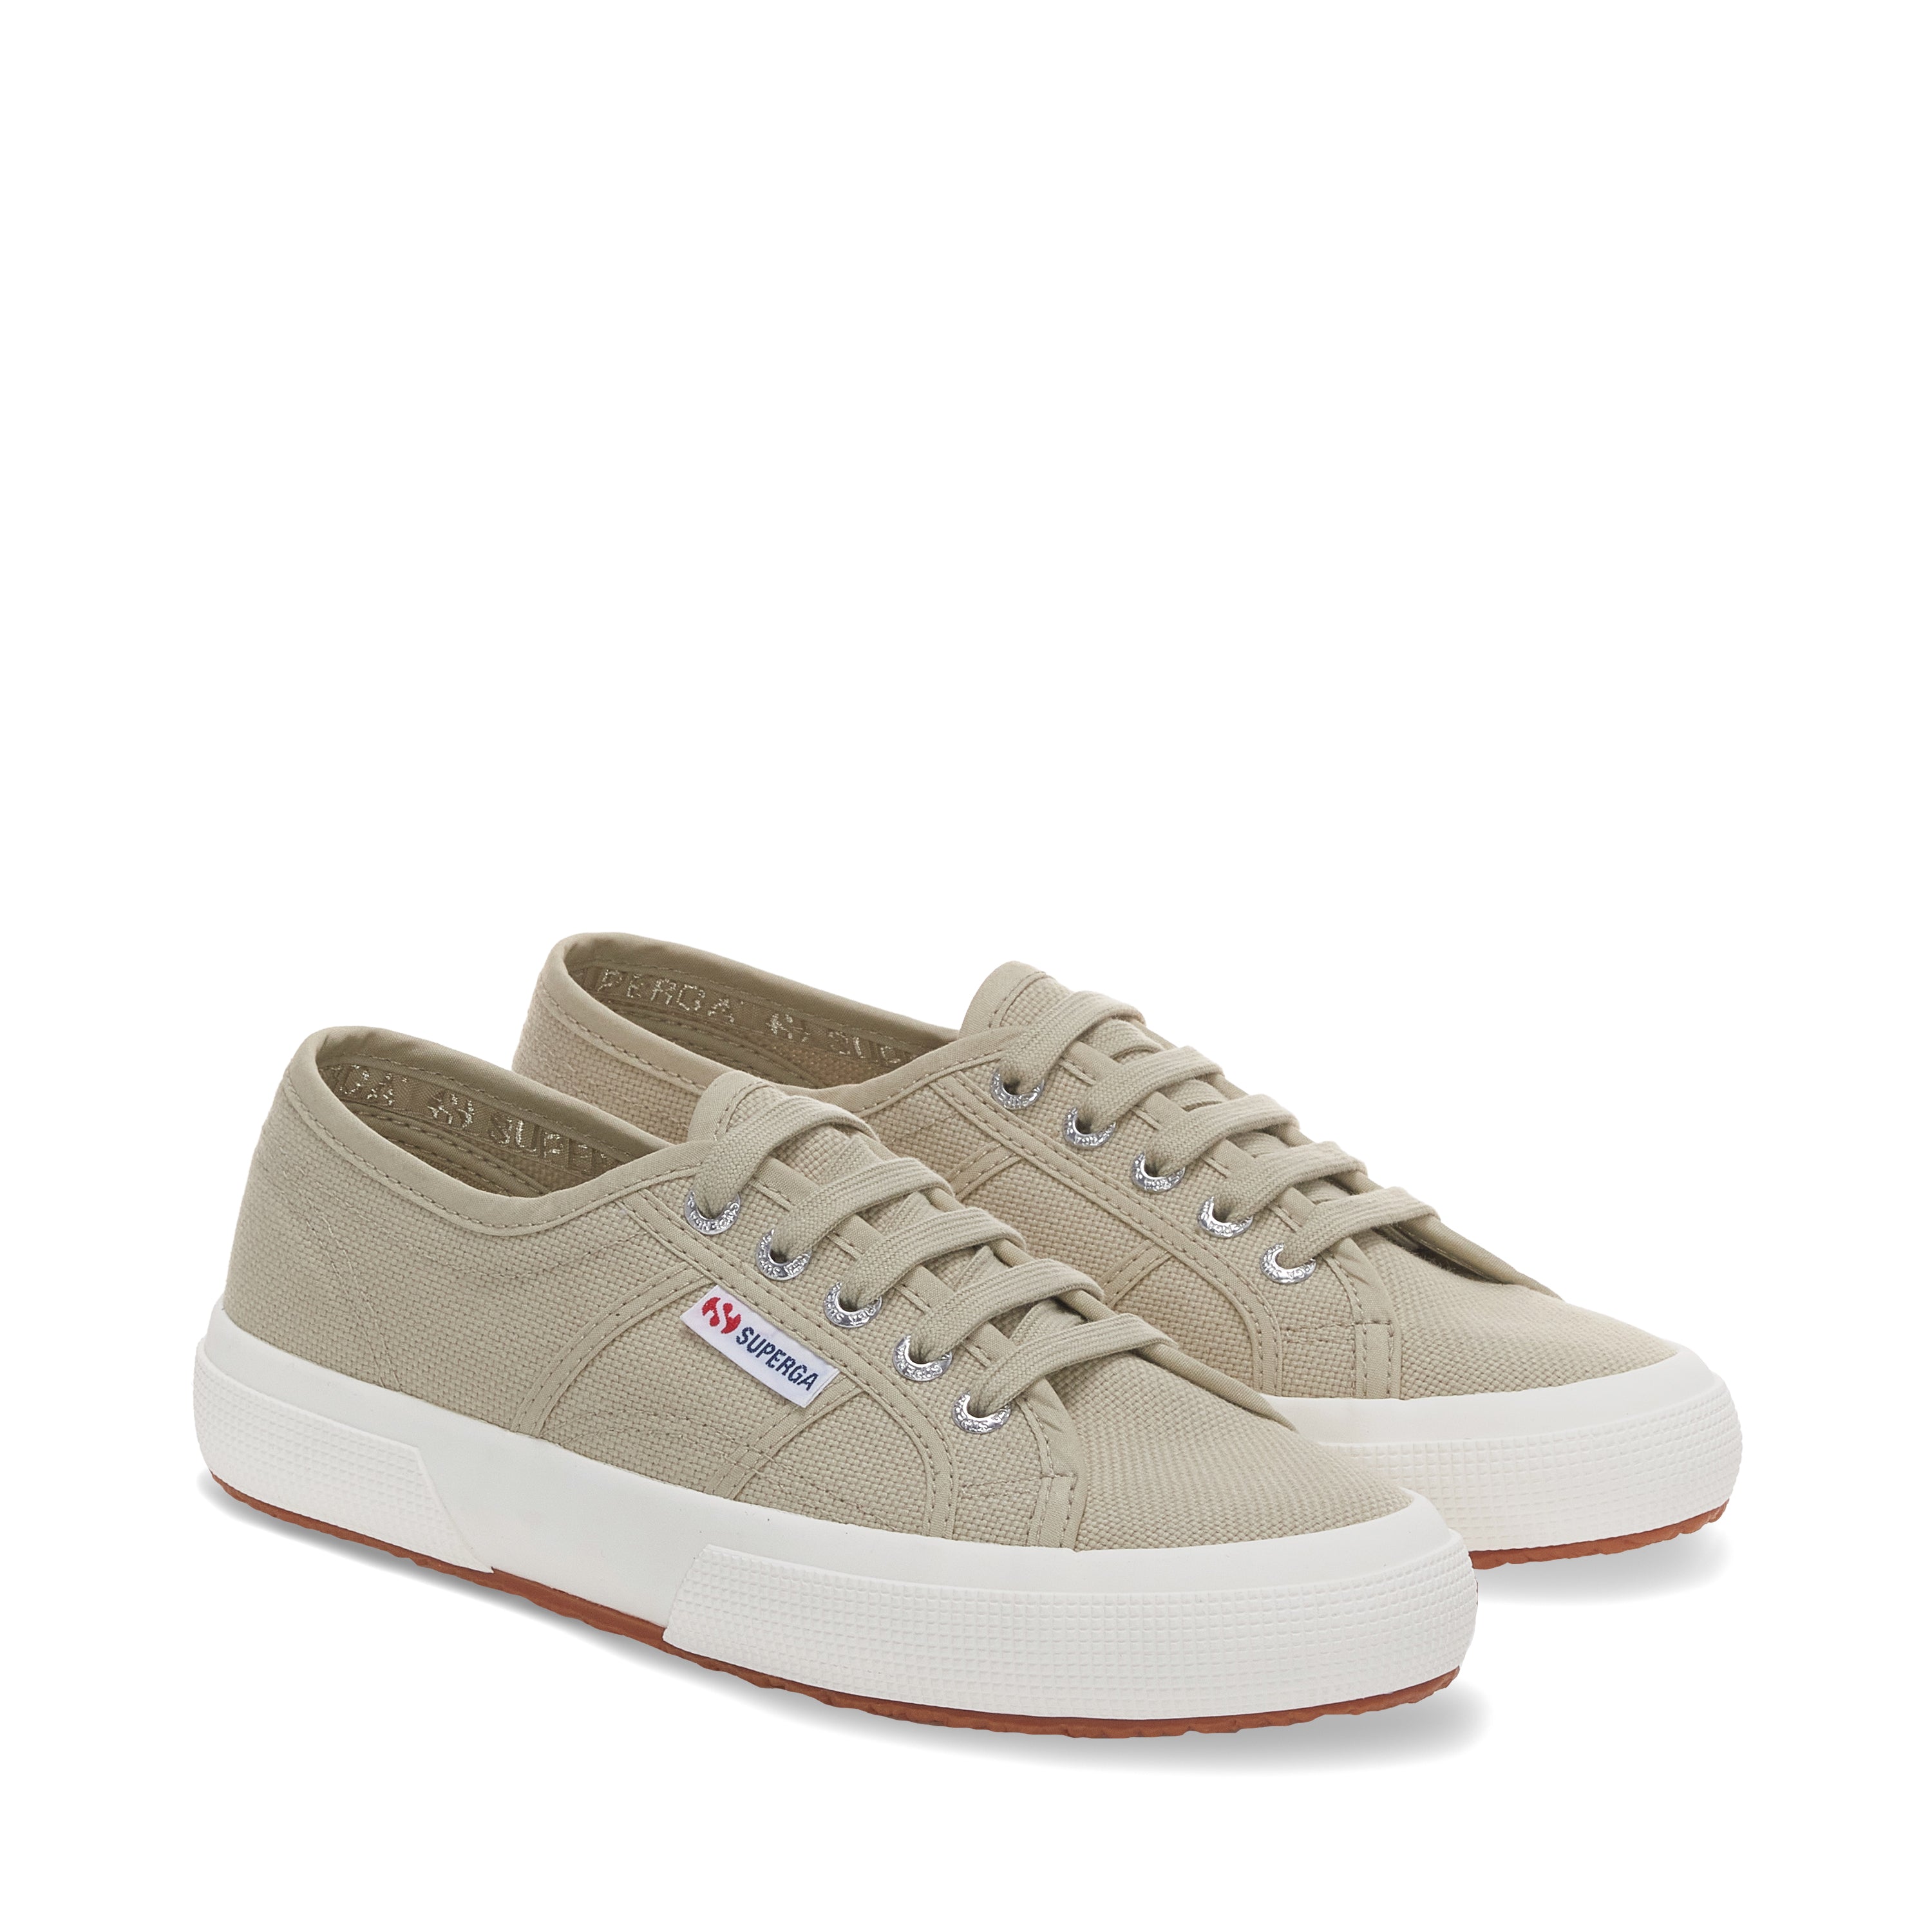 Superga 2750 Cotu Classic Sneakers - Agate Grey. Front view.